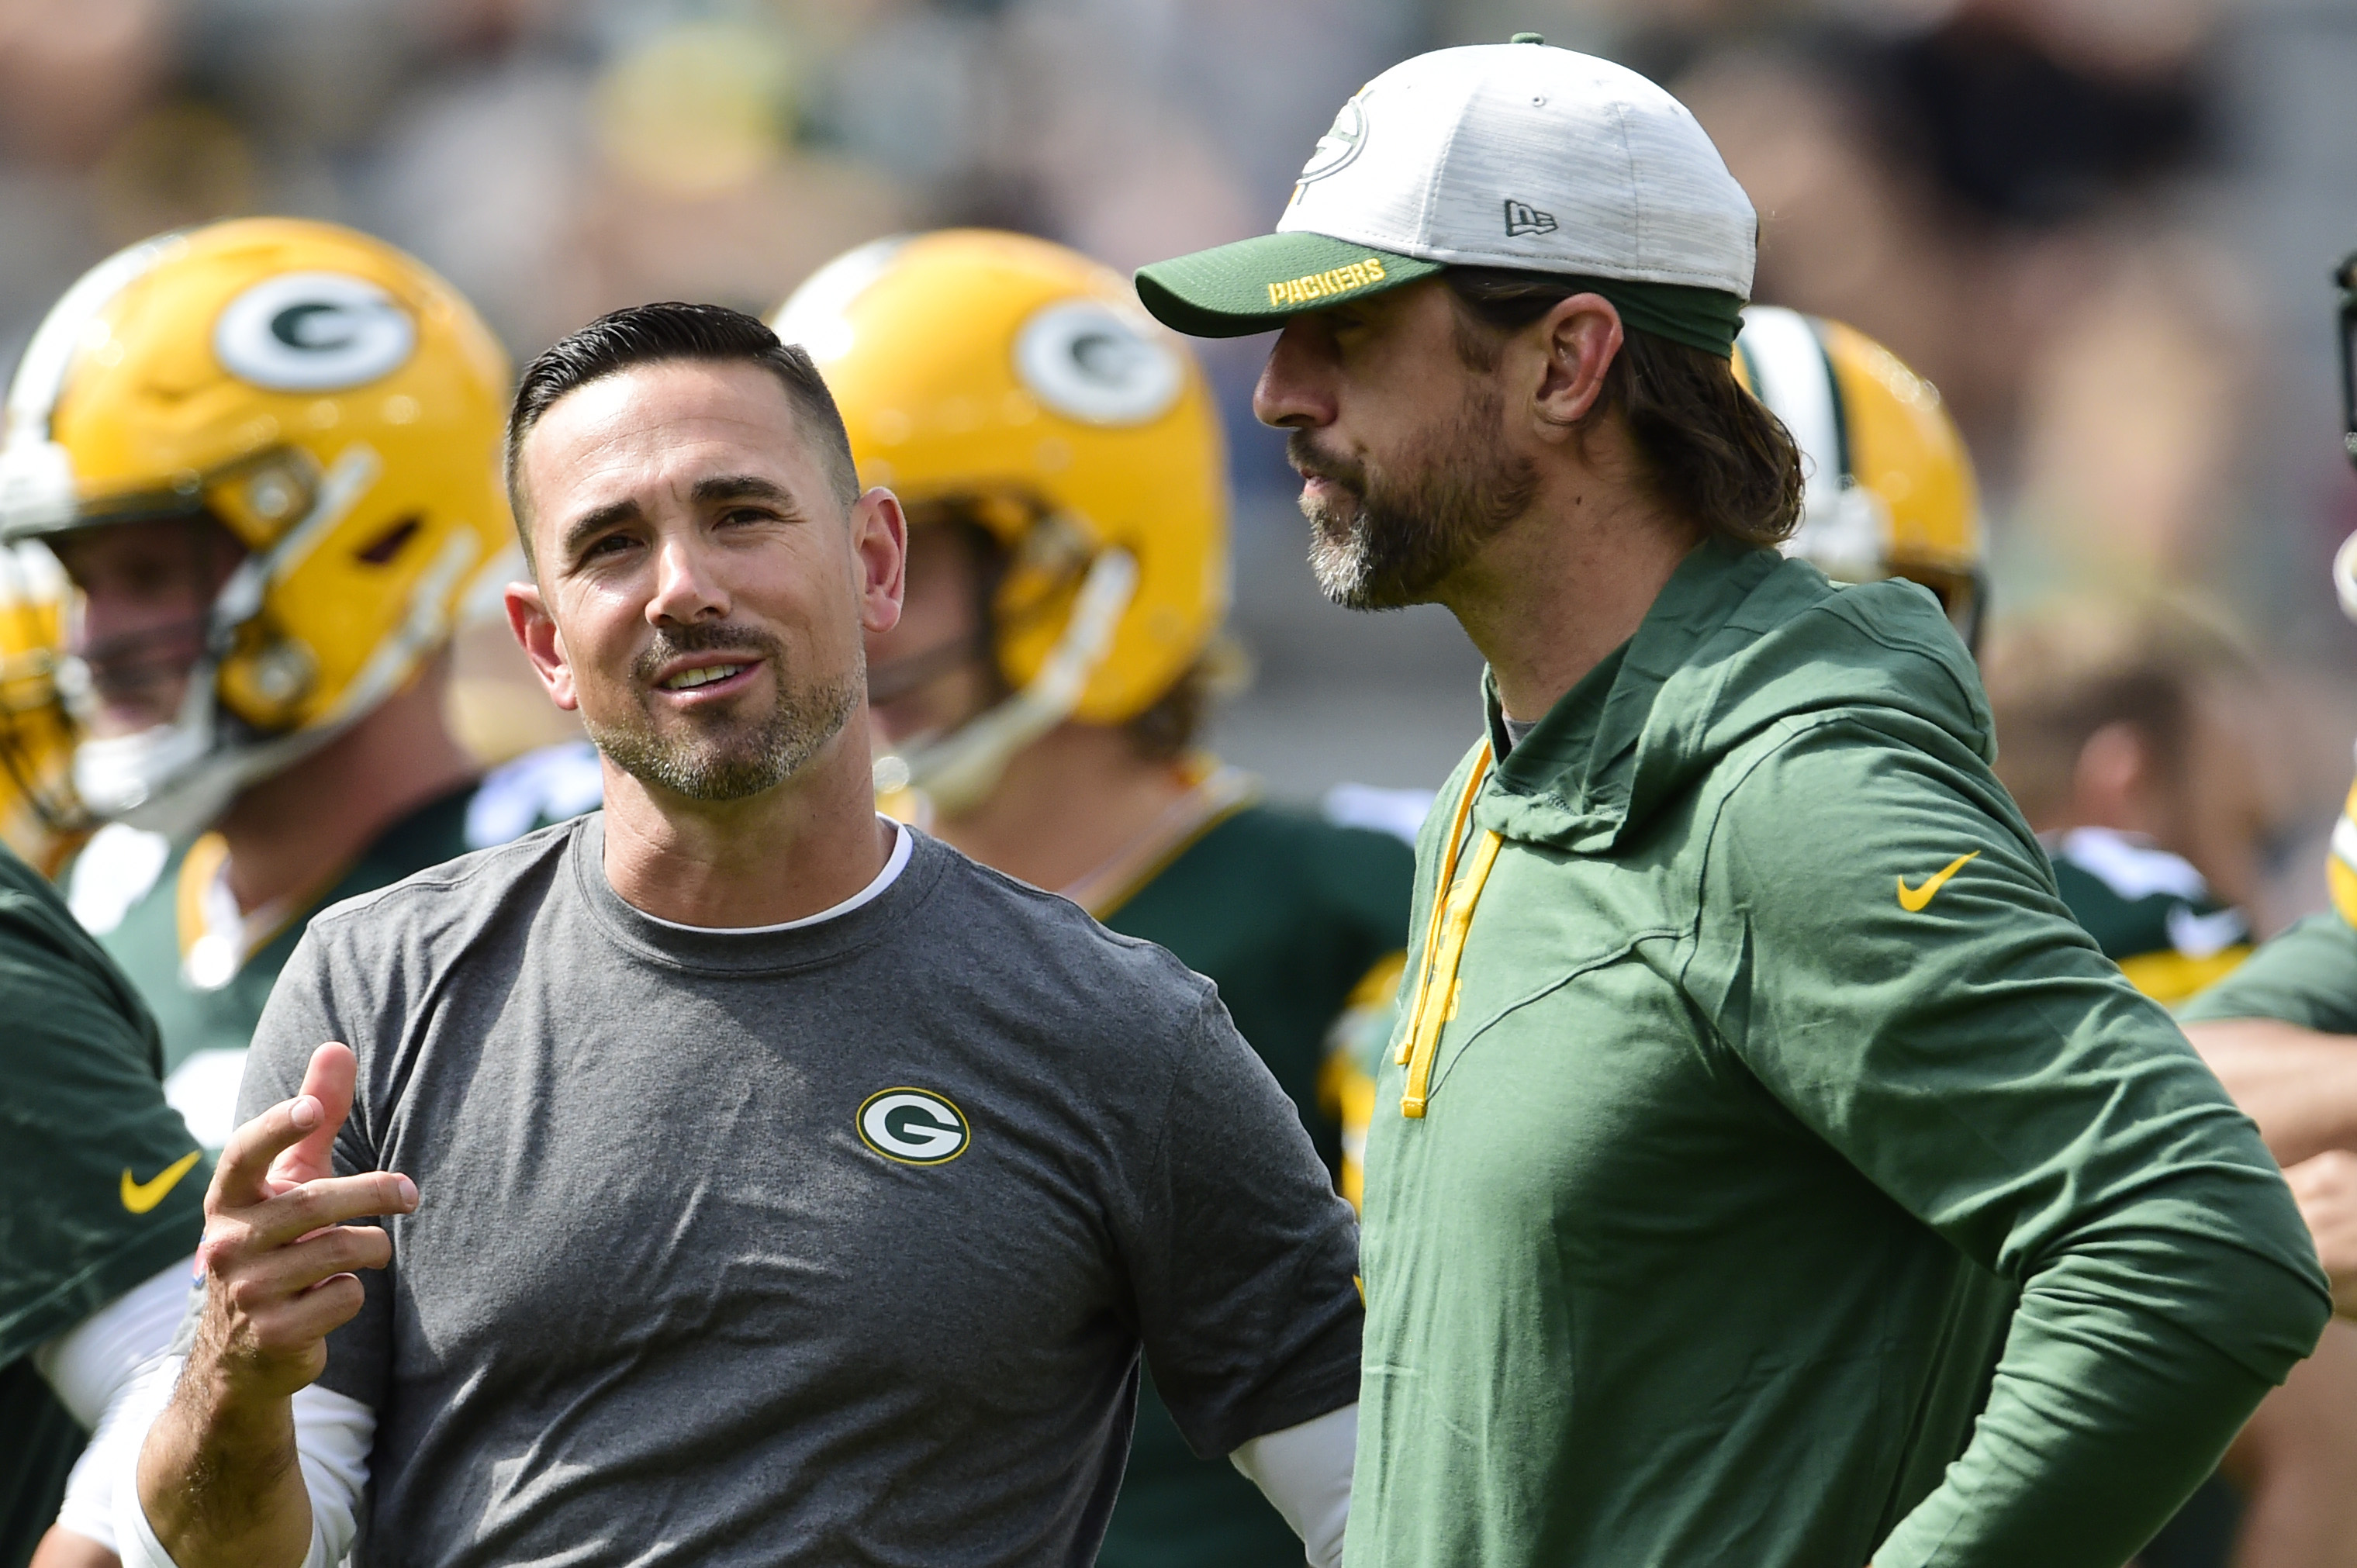 Head coach Matt LaFleur of the Green Bay Packers talks with Aaron Rodgers during warmups.